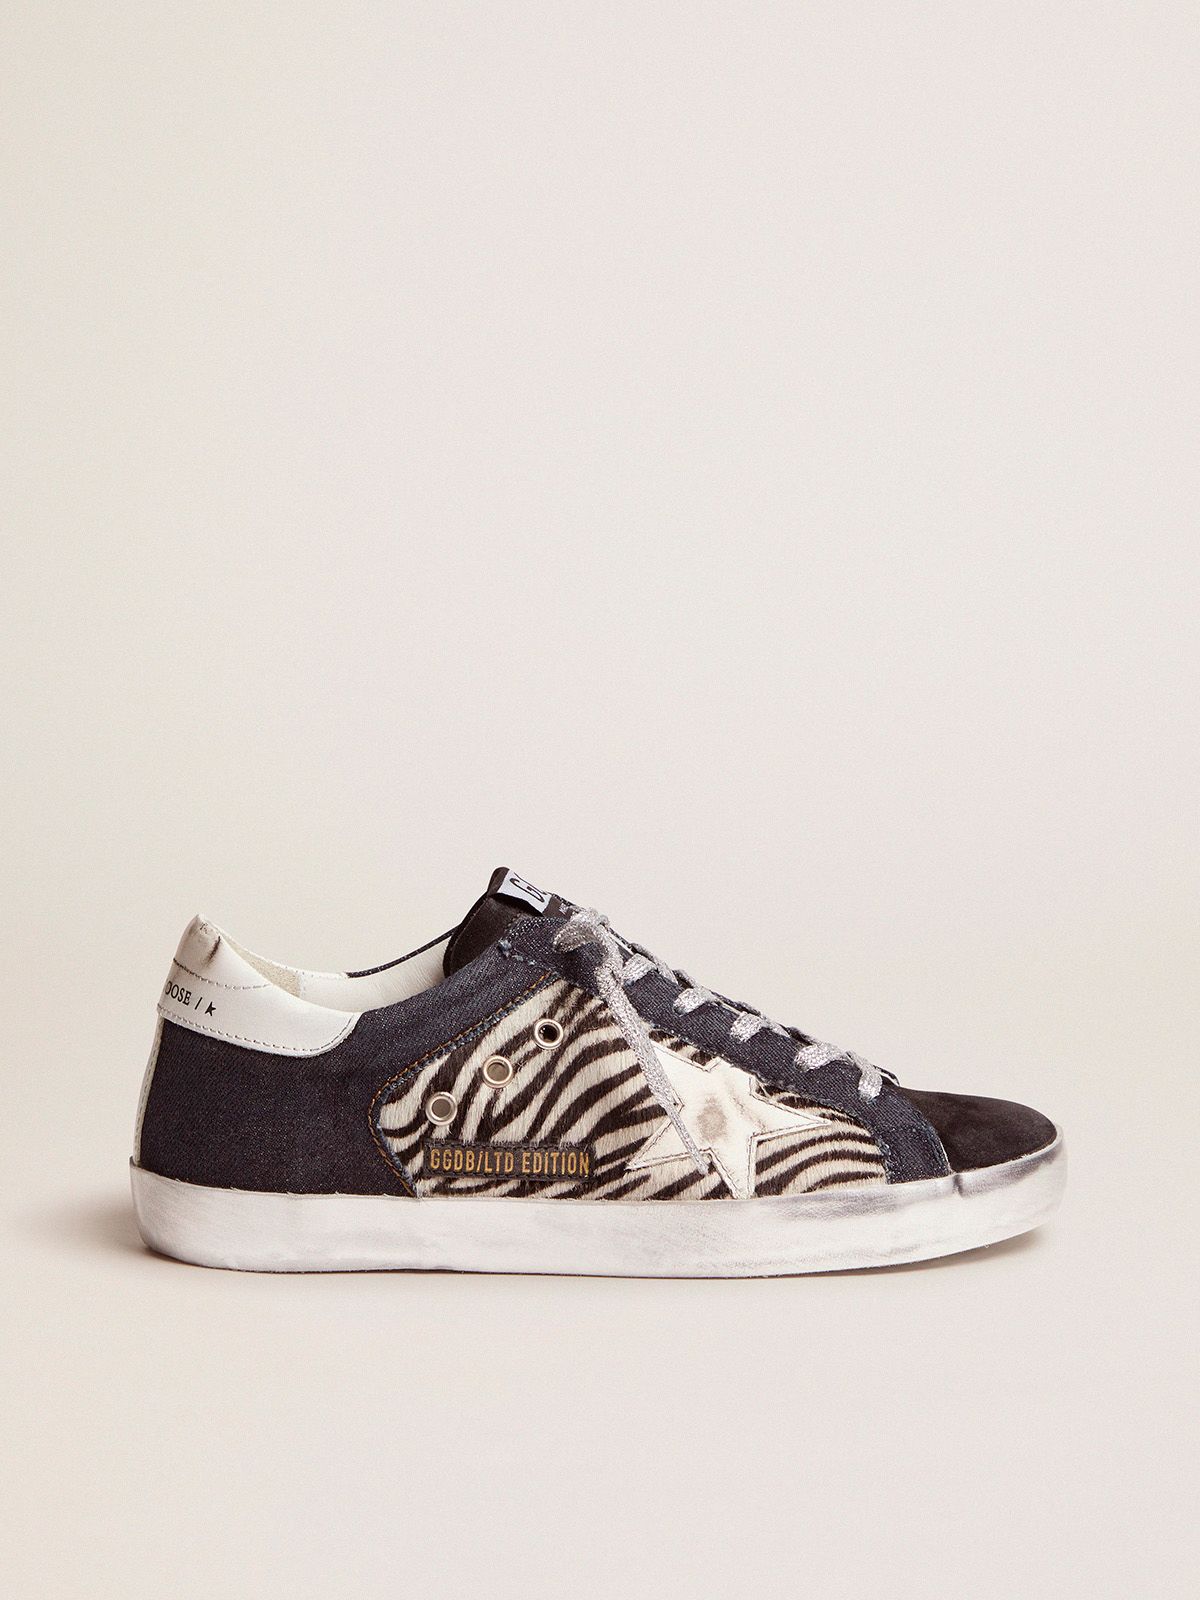 golden goose zebra-print skin sneakers in and suede Limited LAB Edition denim, Super-Star pony